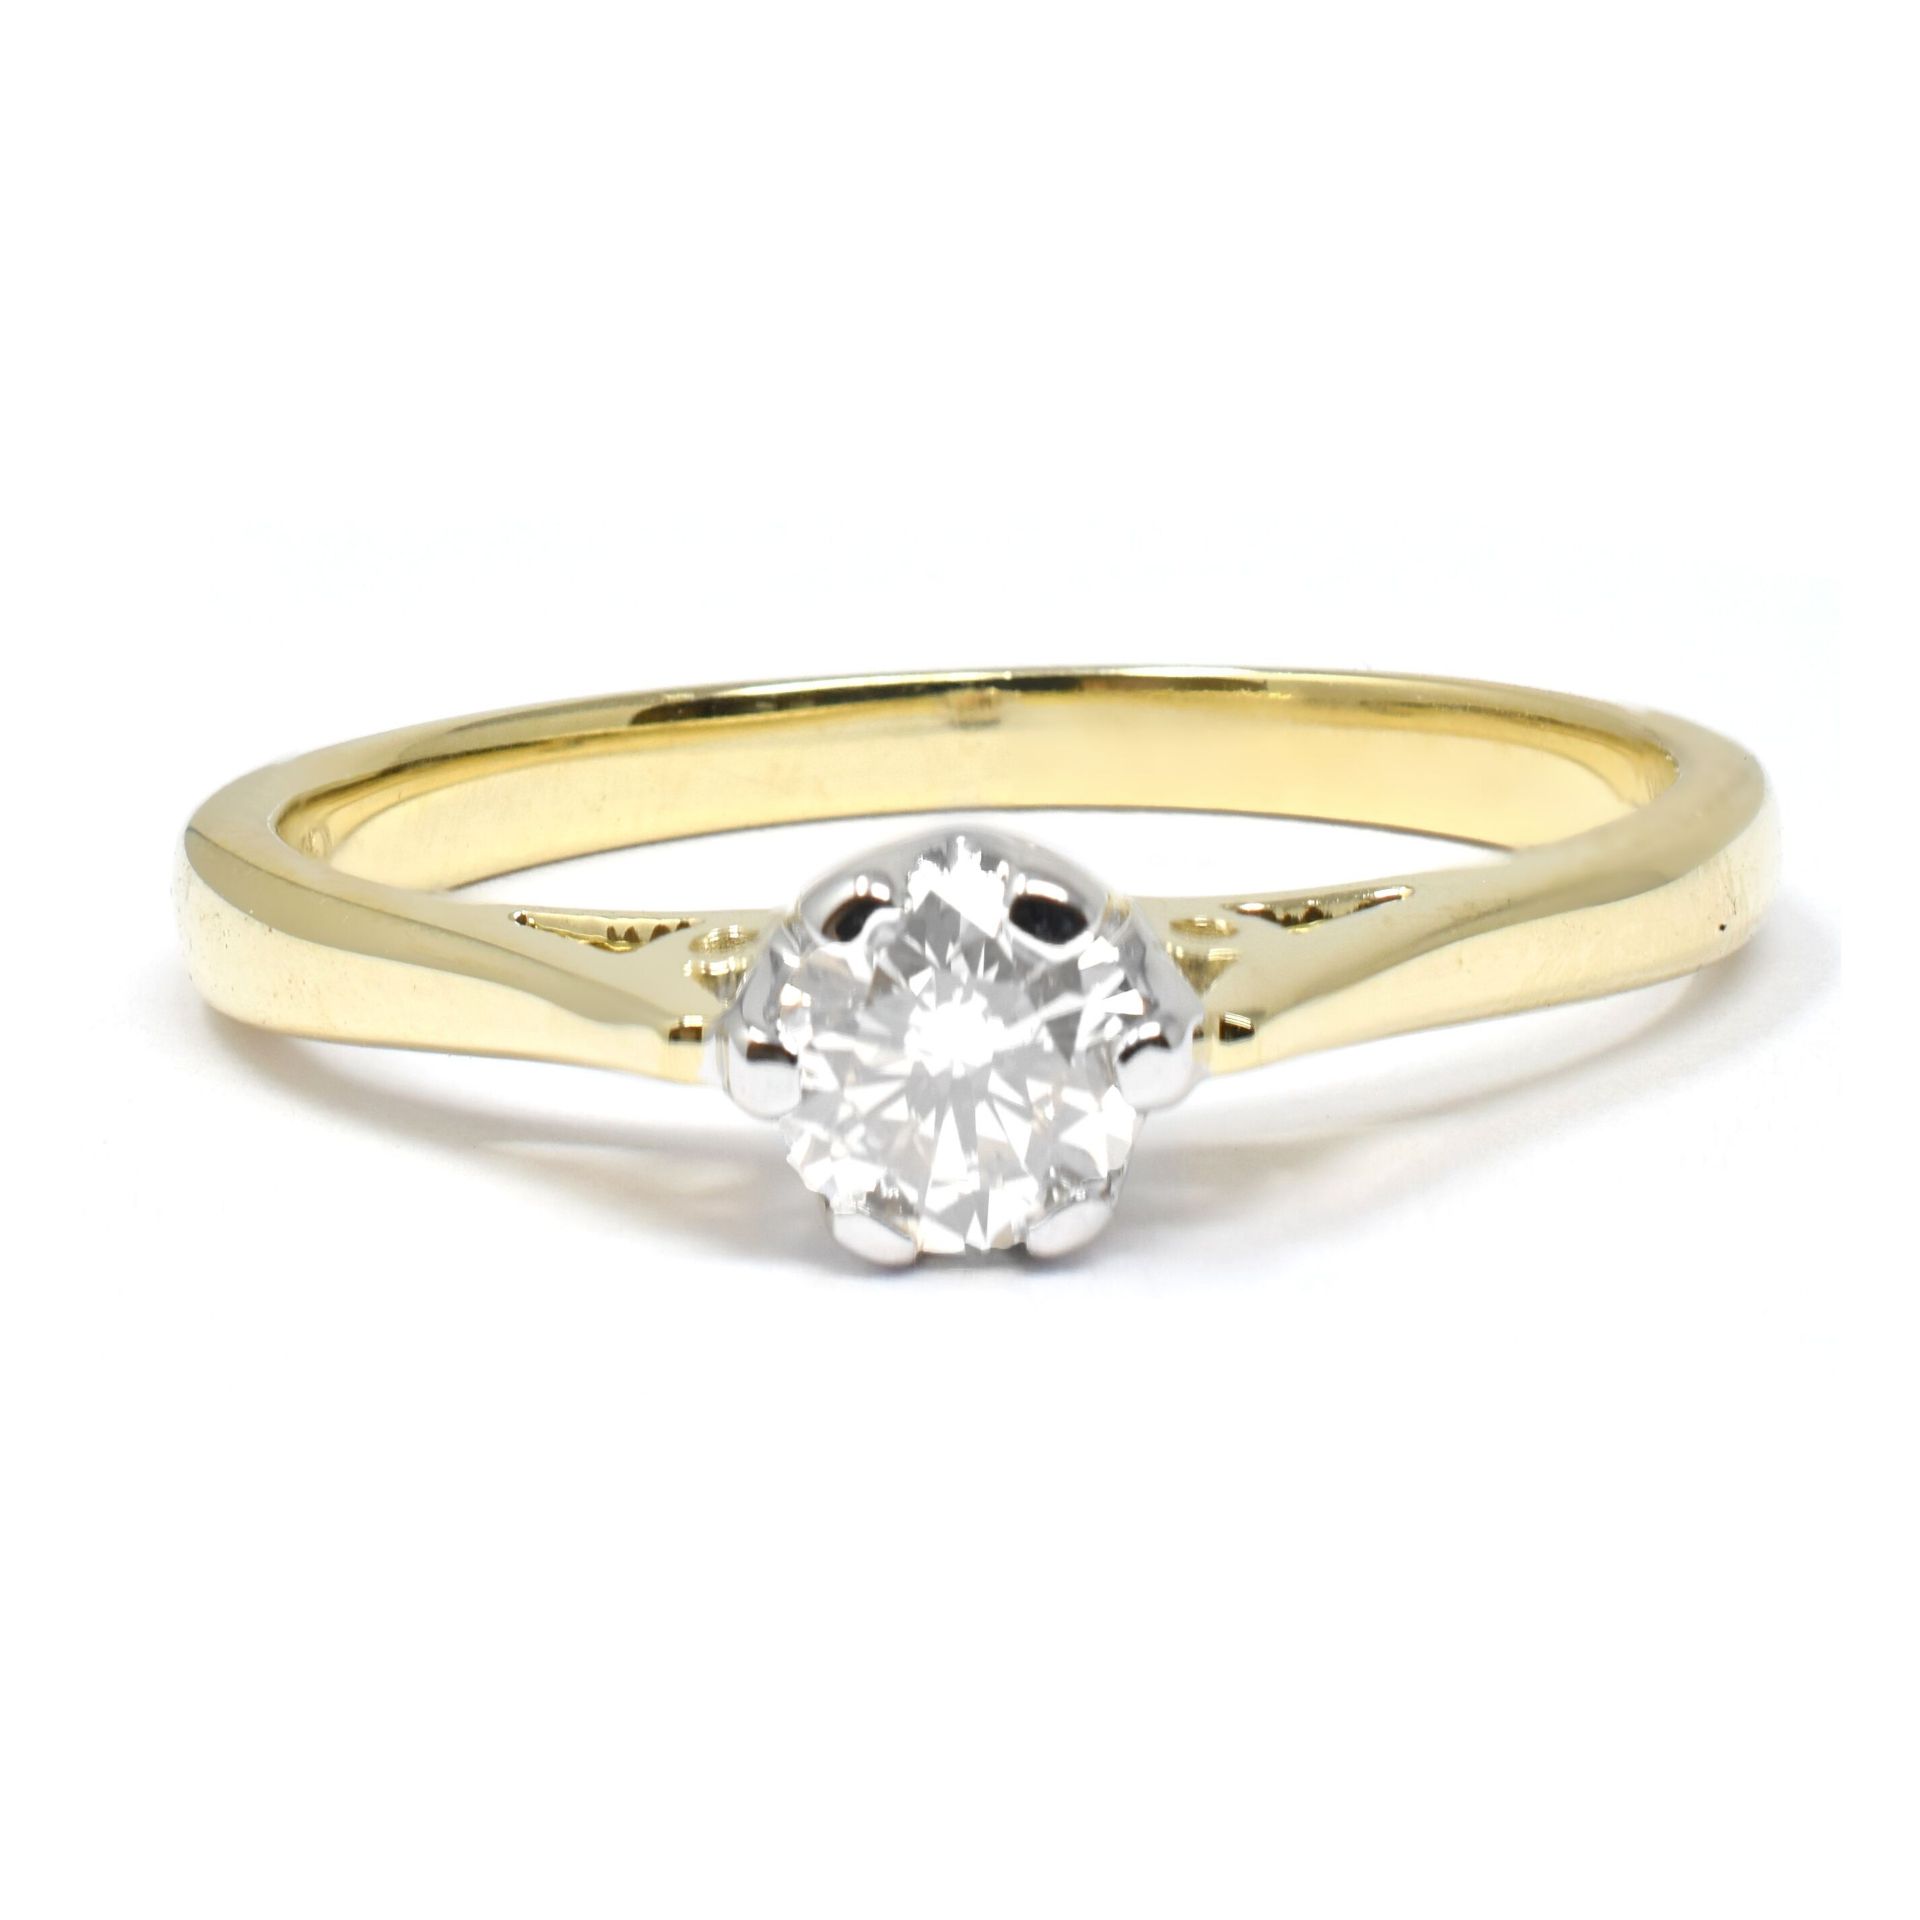 Diamond Engagement Ring, 9ct Yellow Gold RRP £999 Weight 2.21g, Diamond Weight 0.25ct, Colour I, - Image 2 of 2